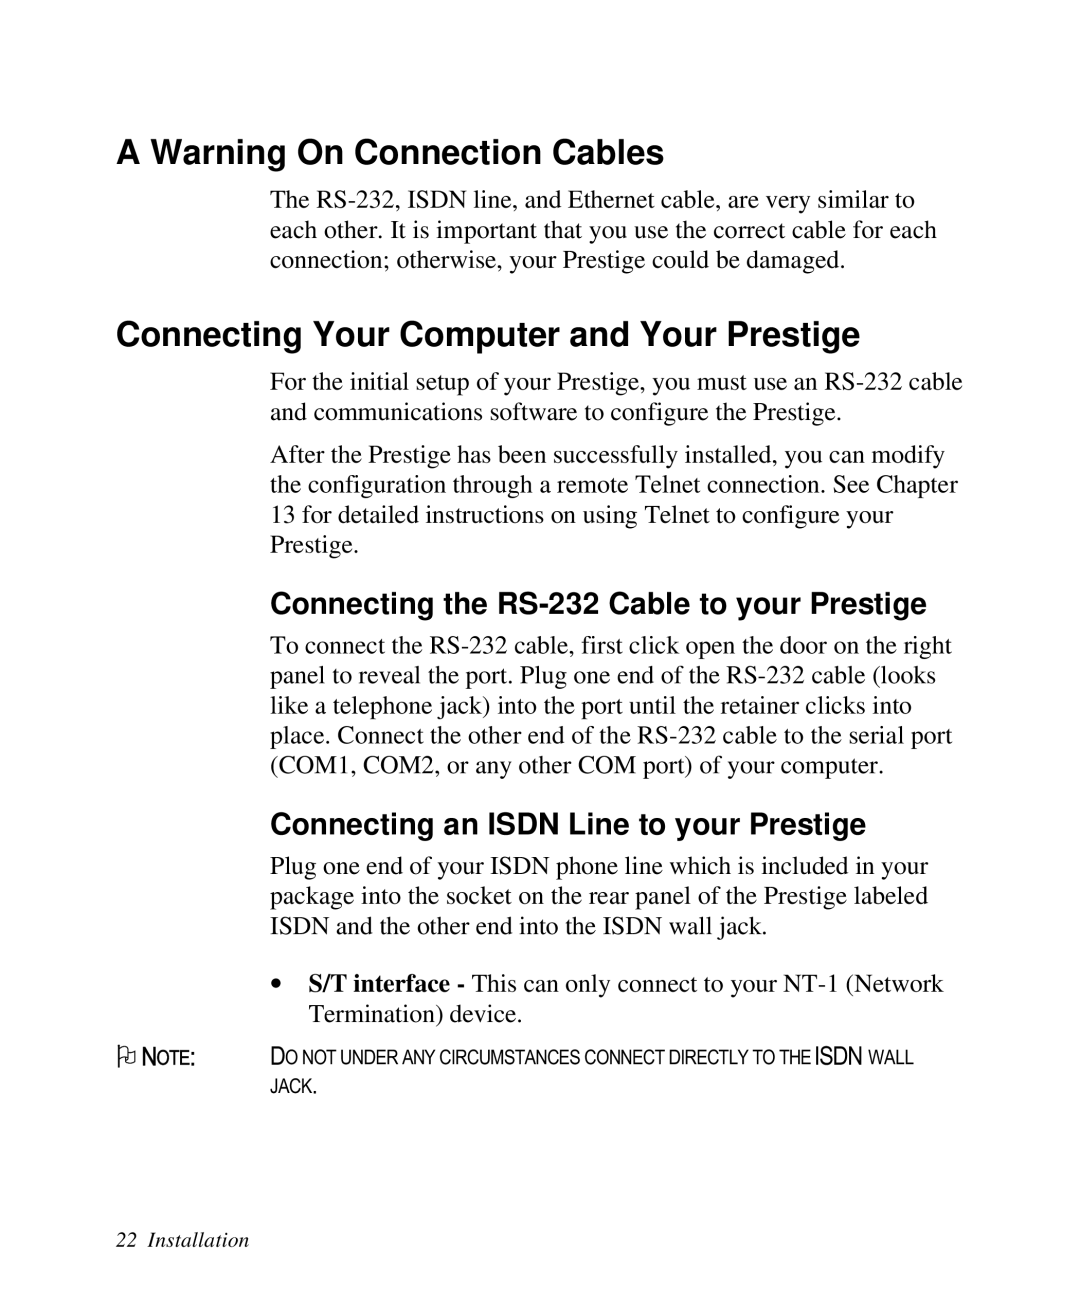 ZyXEL Communications 2864I user manual A Warning On Connection Cables, Connecting Your Computer and Your Prestige 